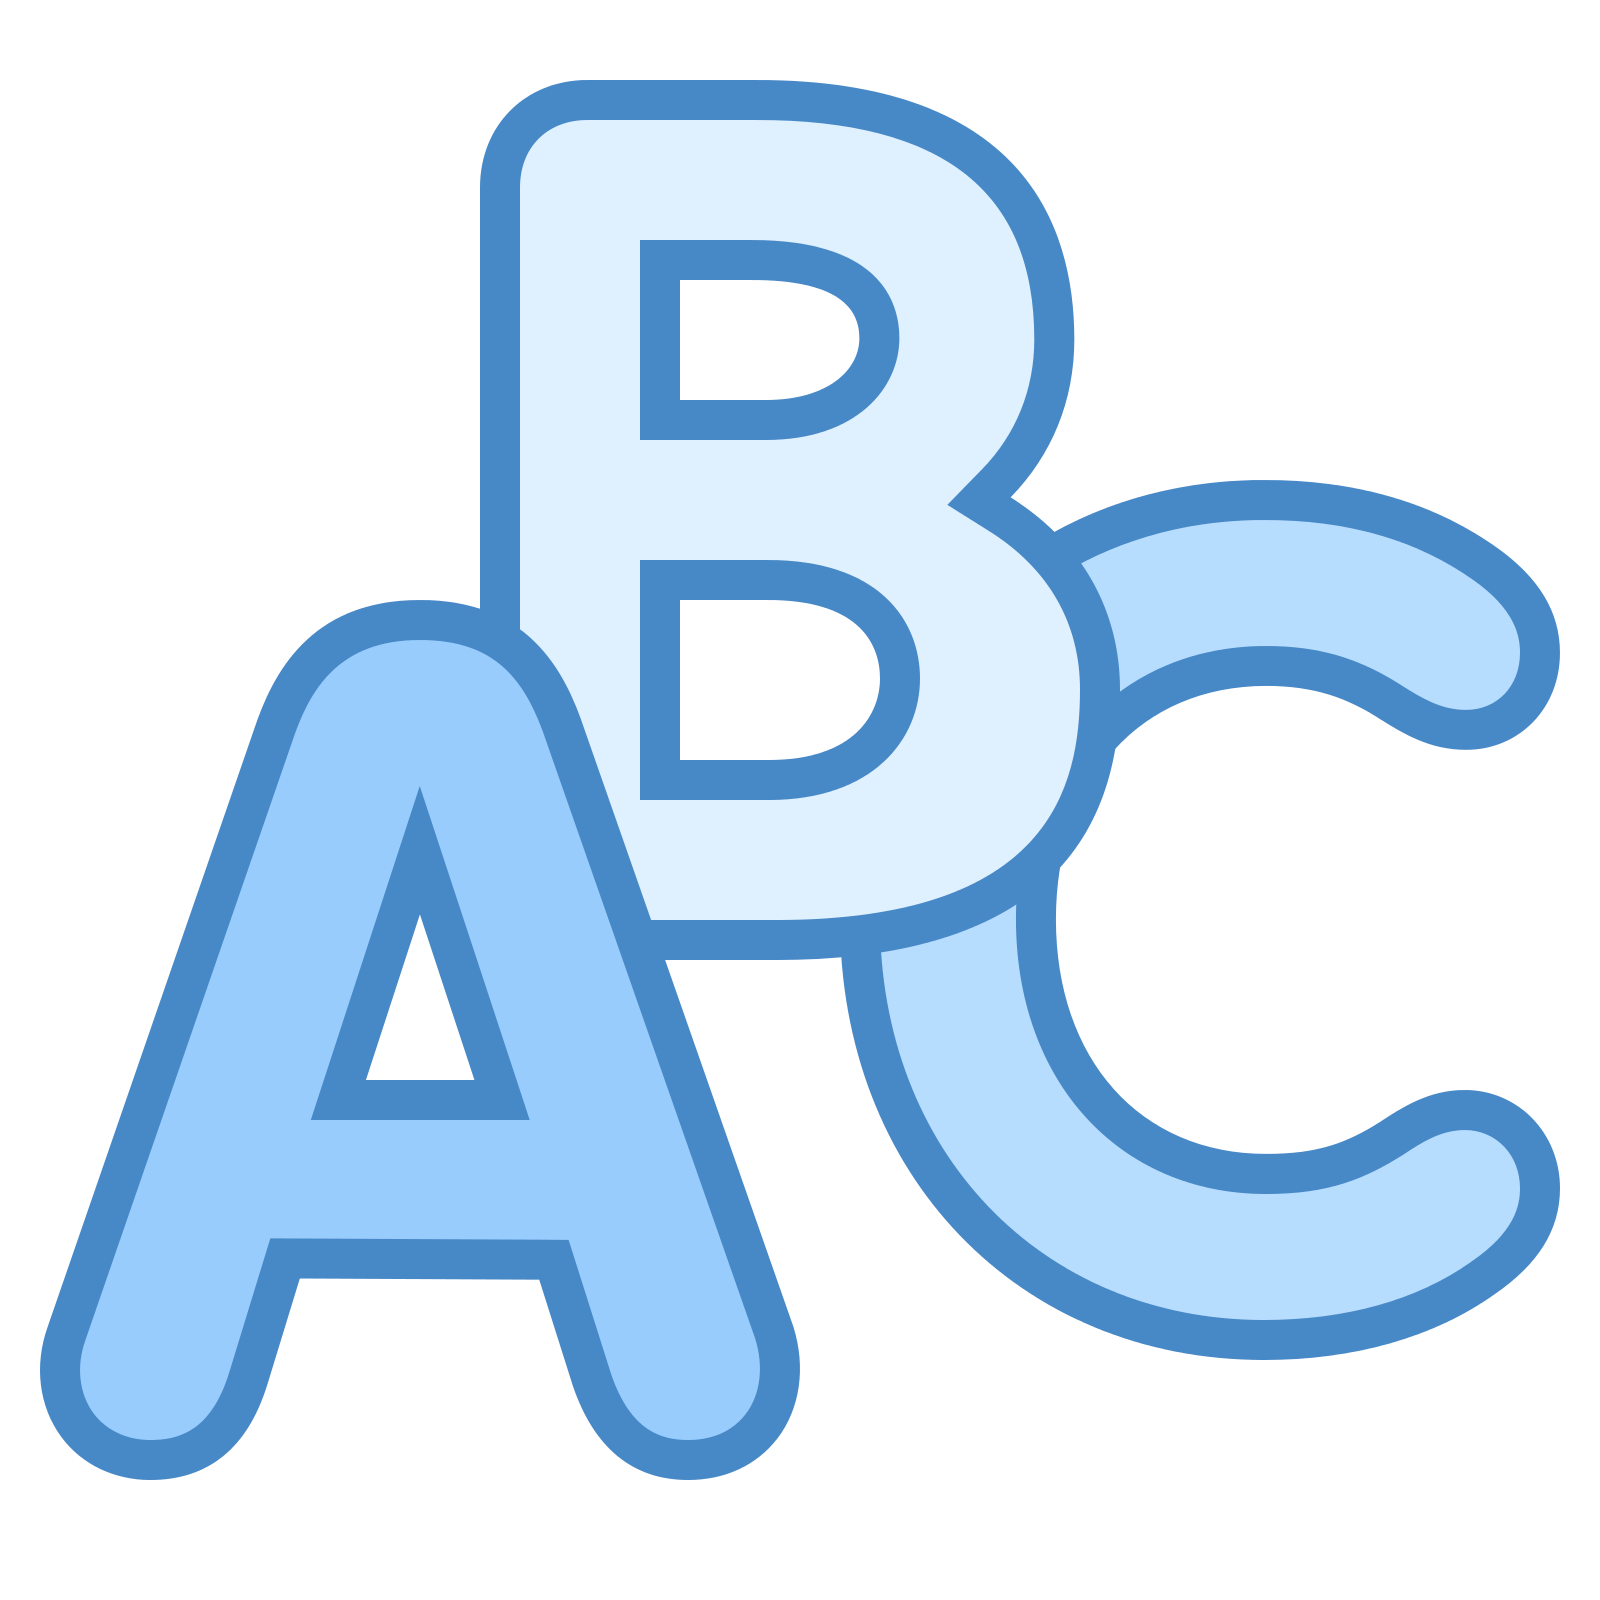 ABC PNG Image